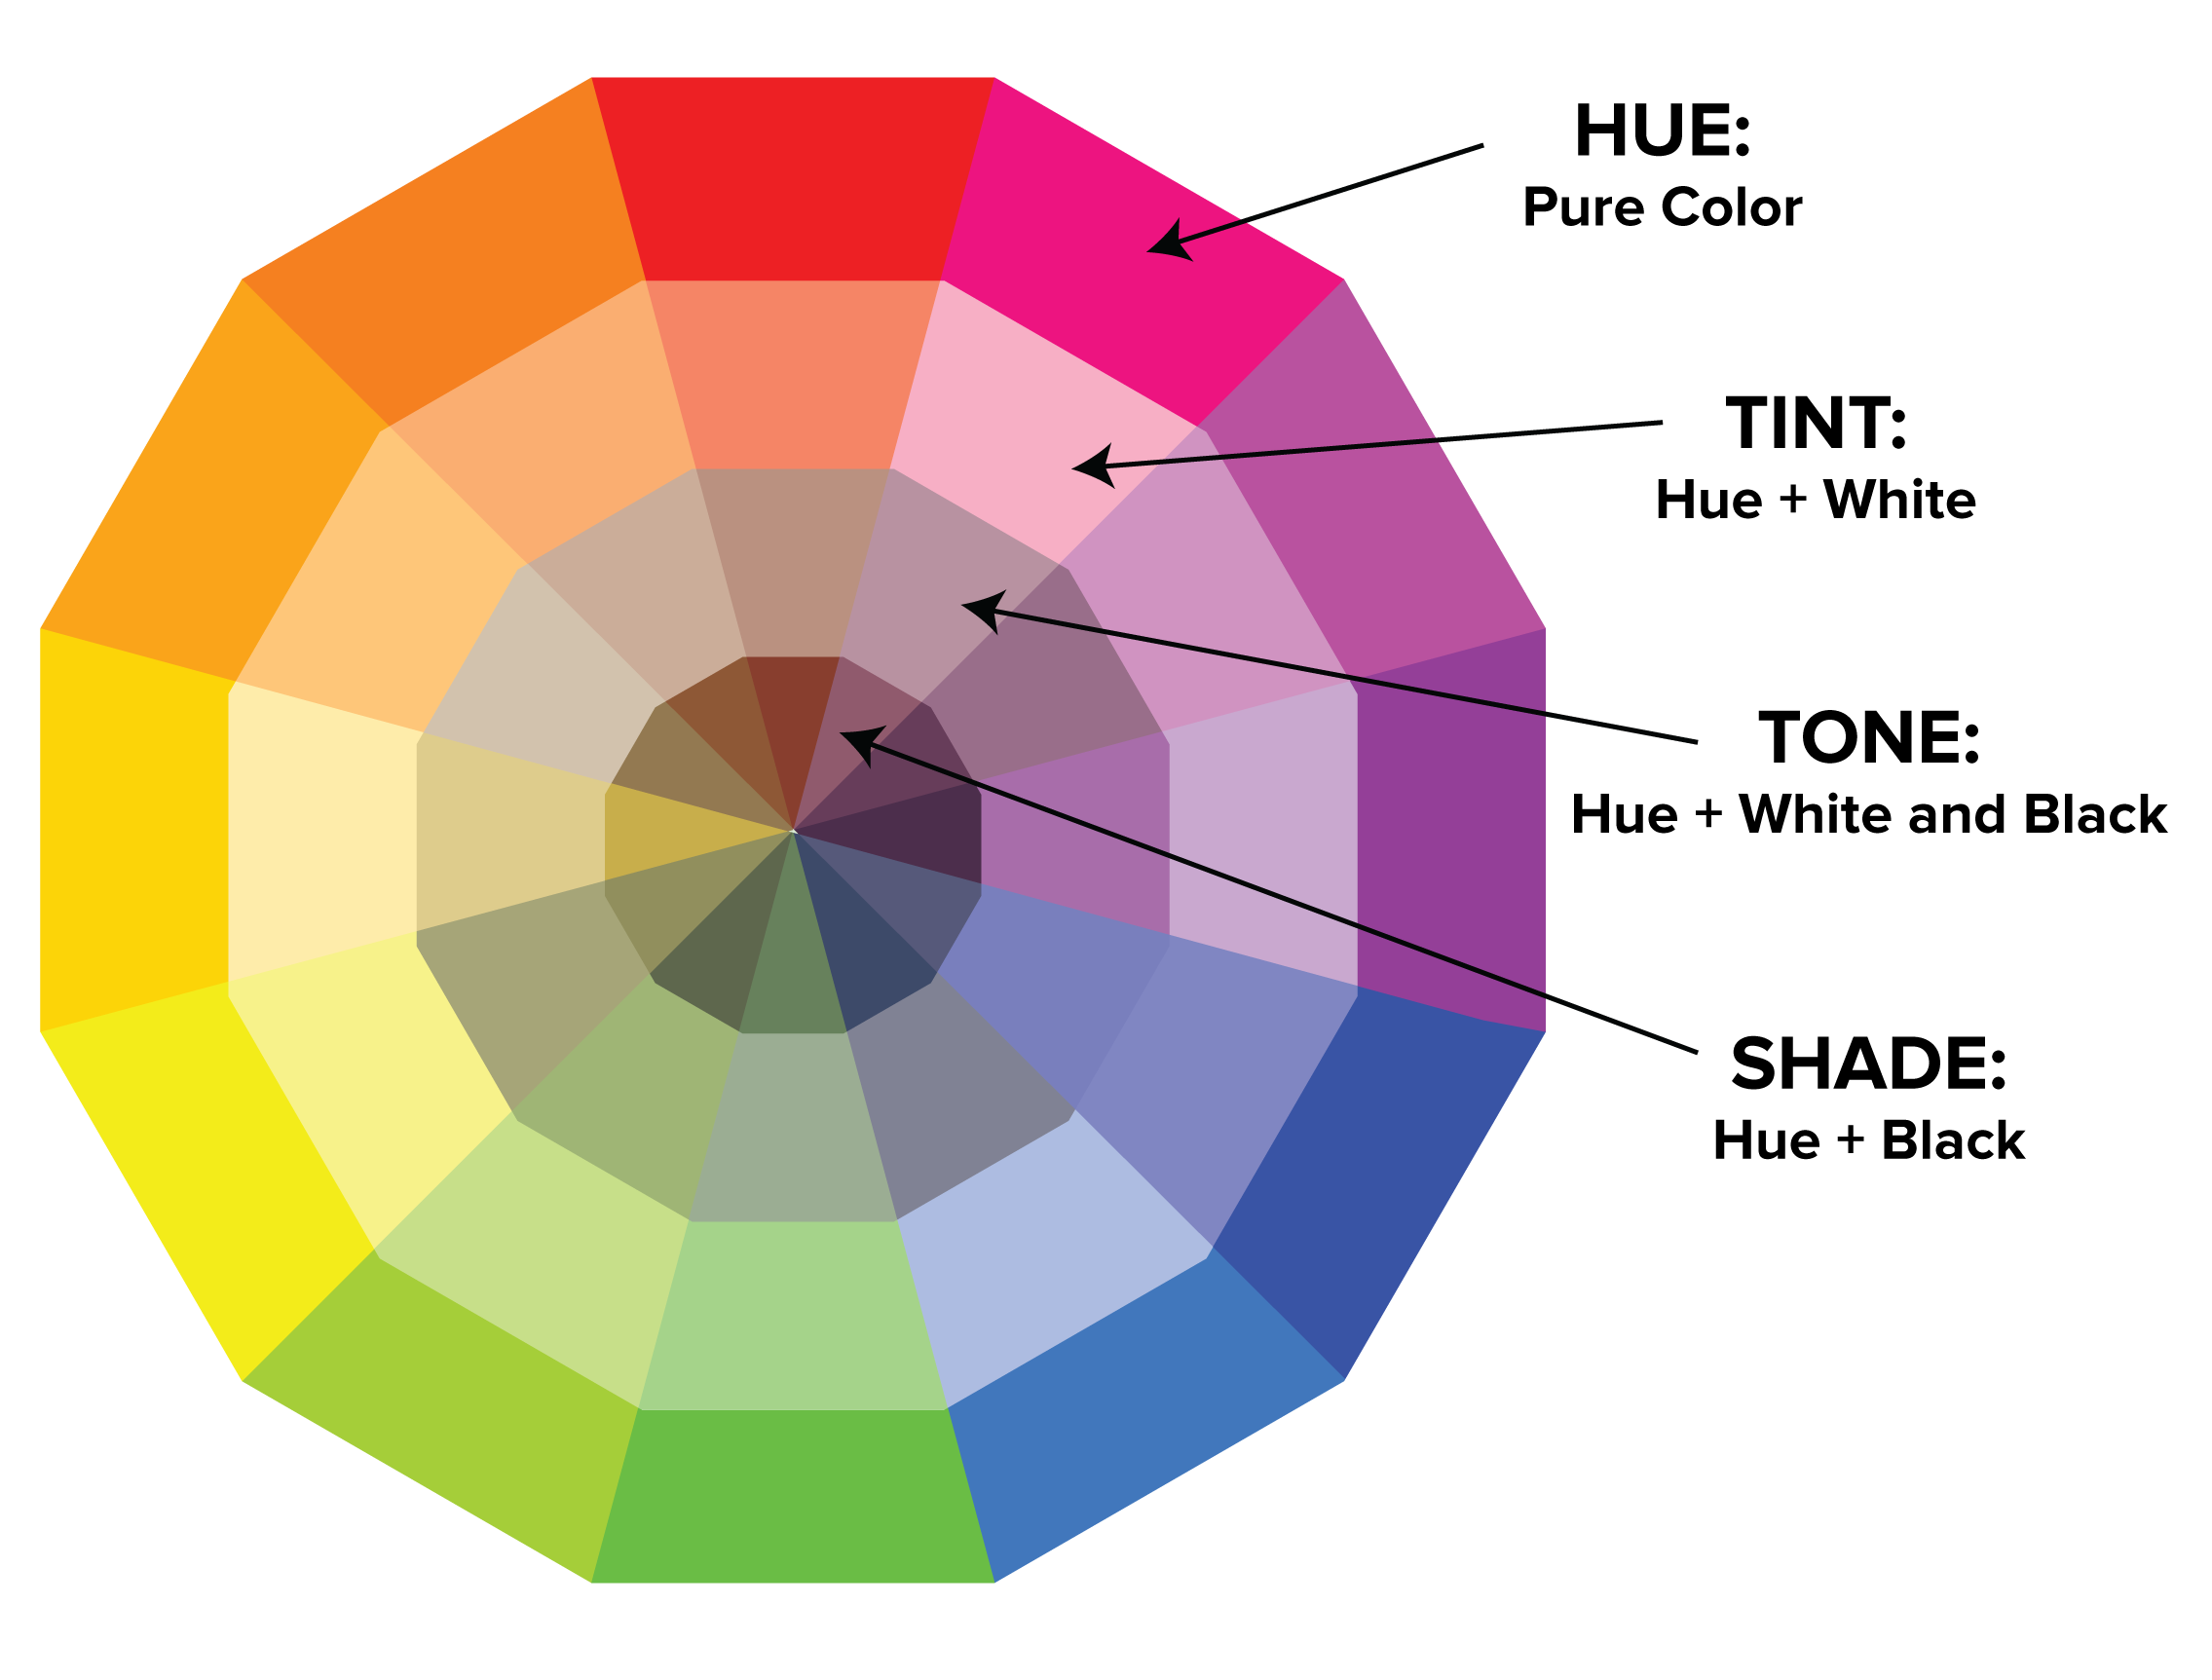 Color Theory 101 How To Choose The Right Colors For Your Designs ⋆